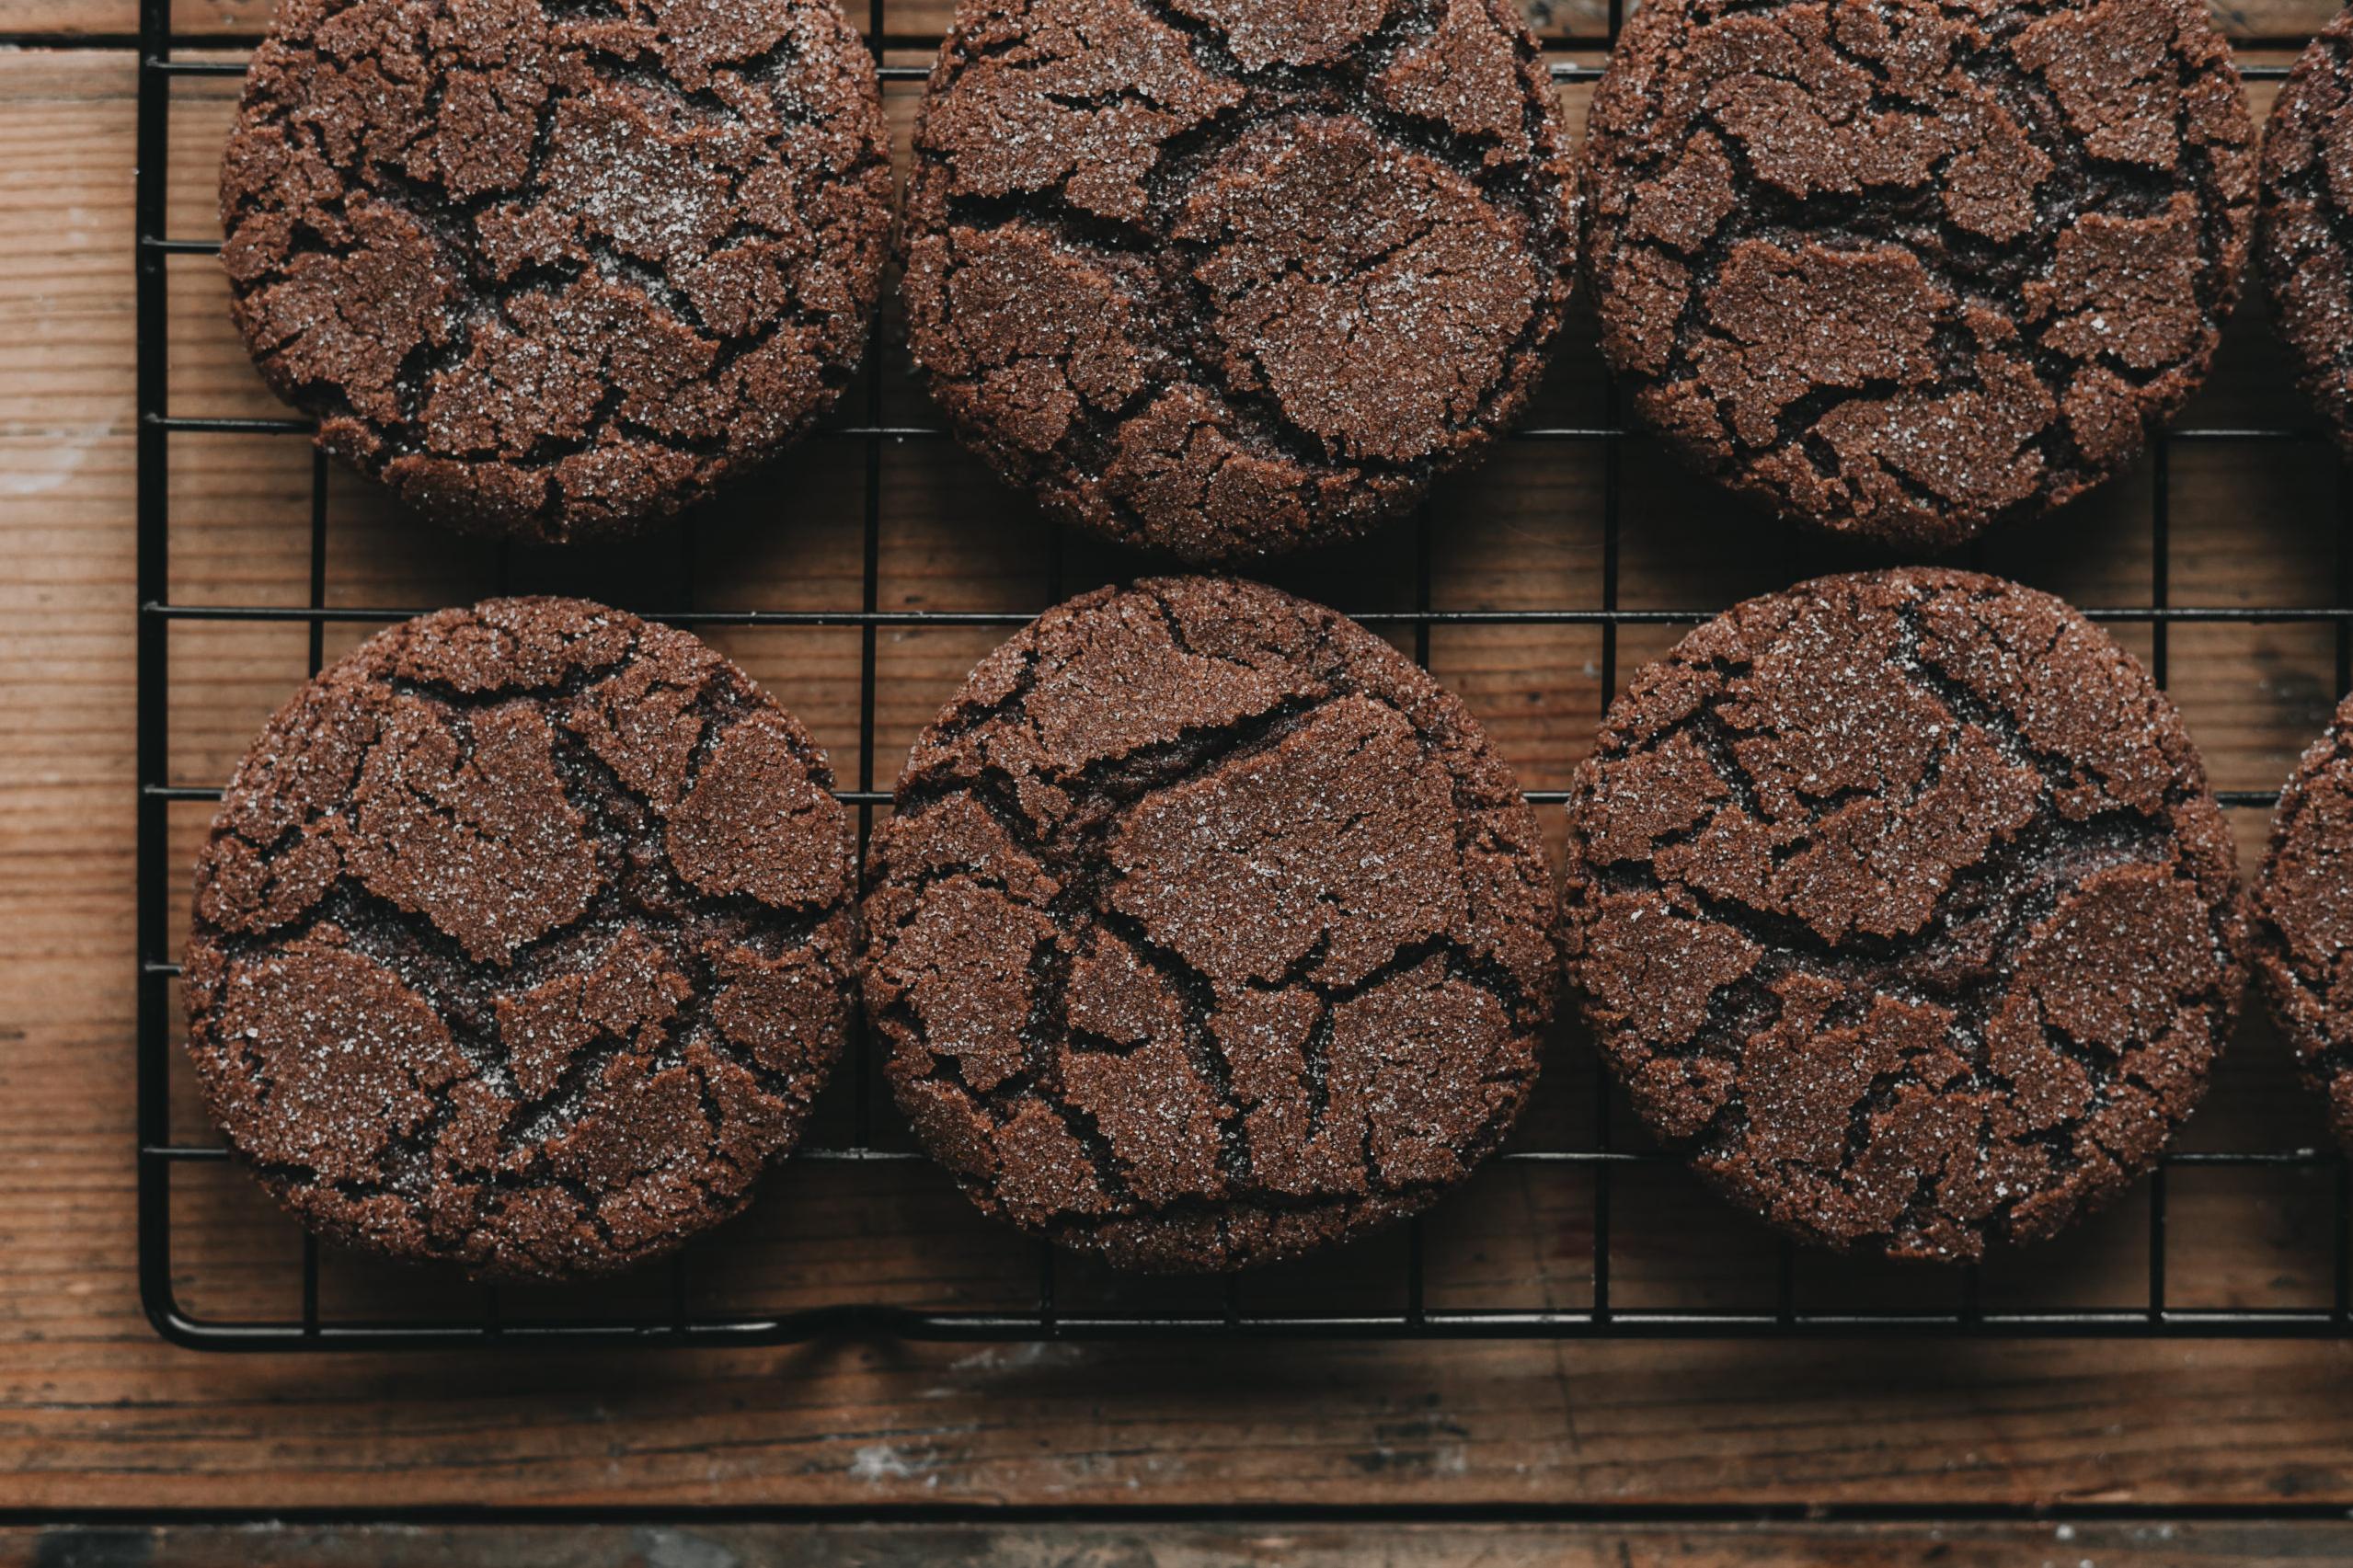  Dare to try something bold and add a jolt of espresso to your cookie baking.